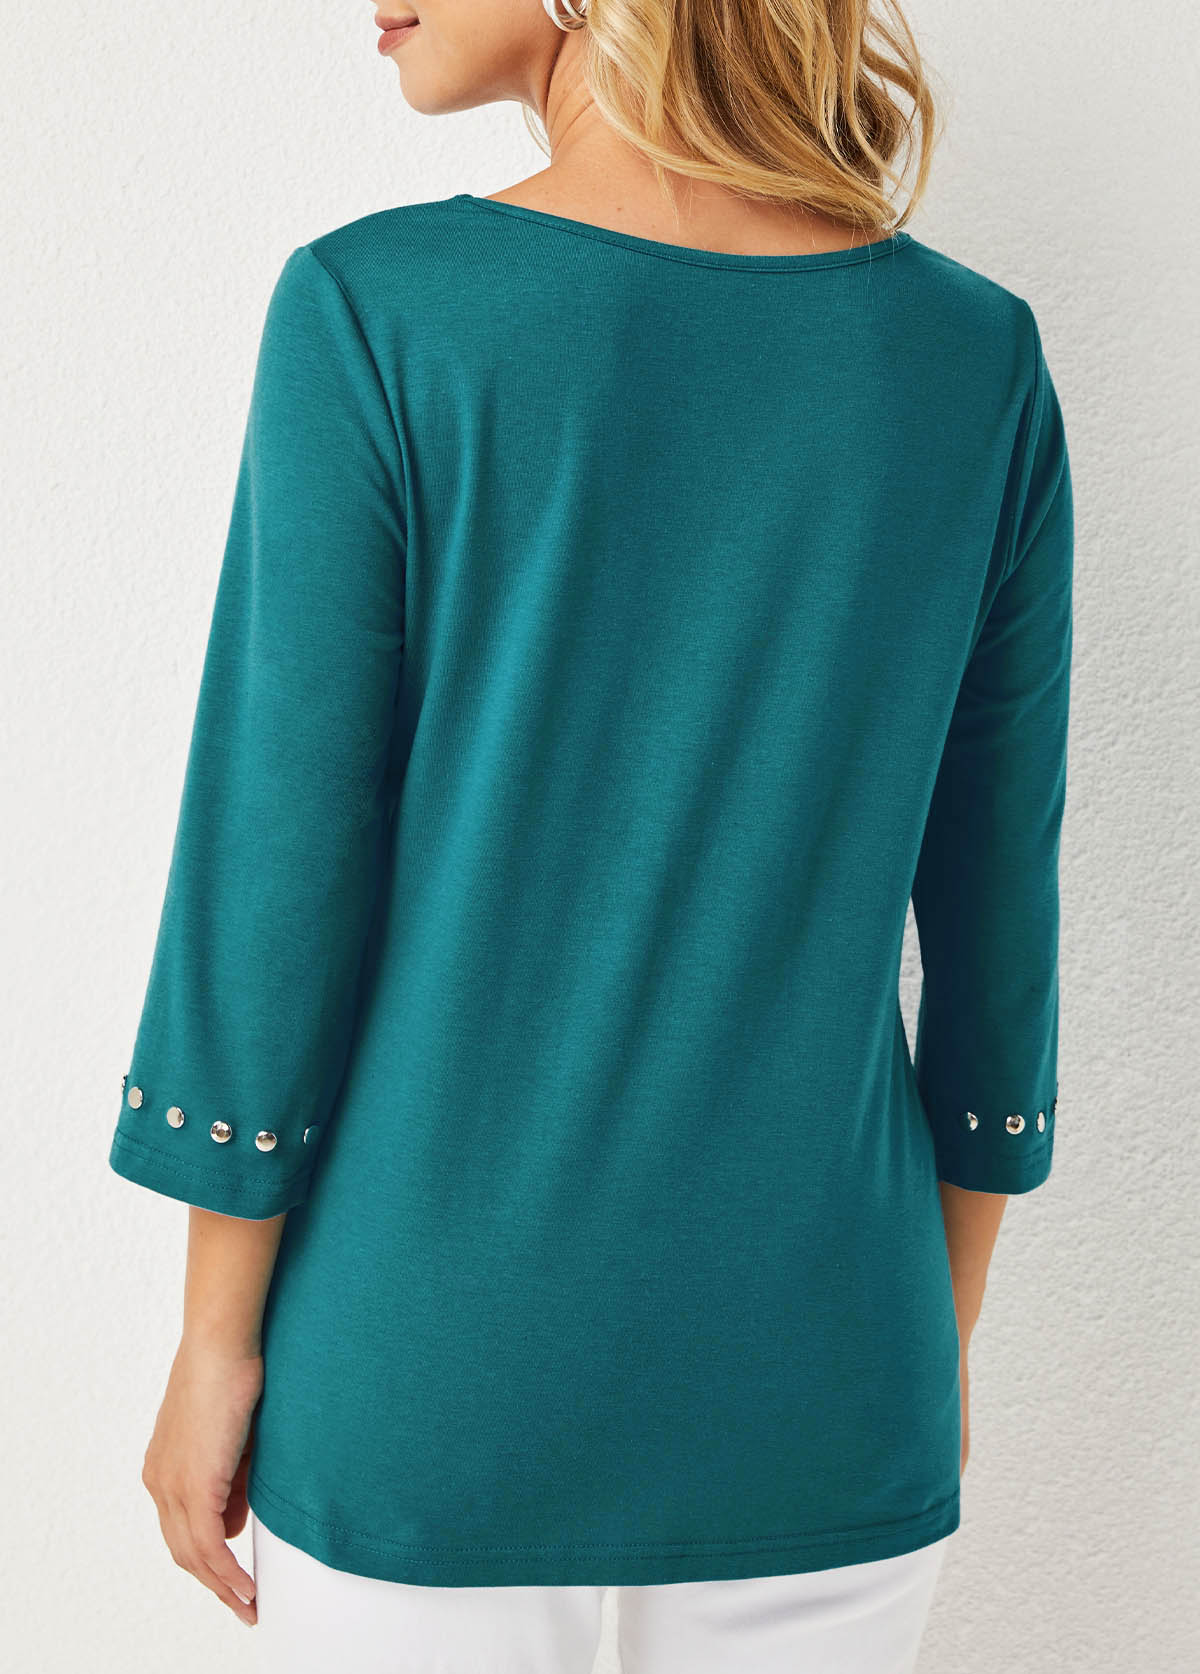 Cutout Front 3/4 Sleeve Round Neck T Shirt